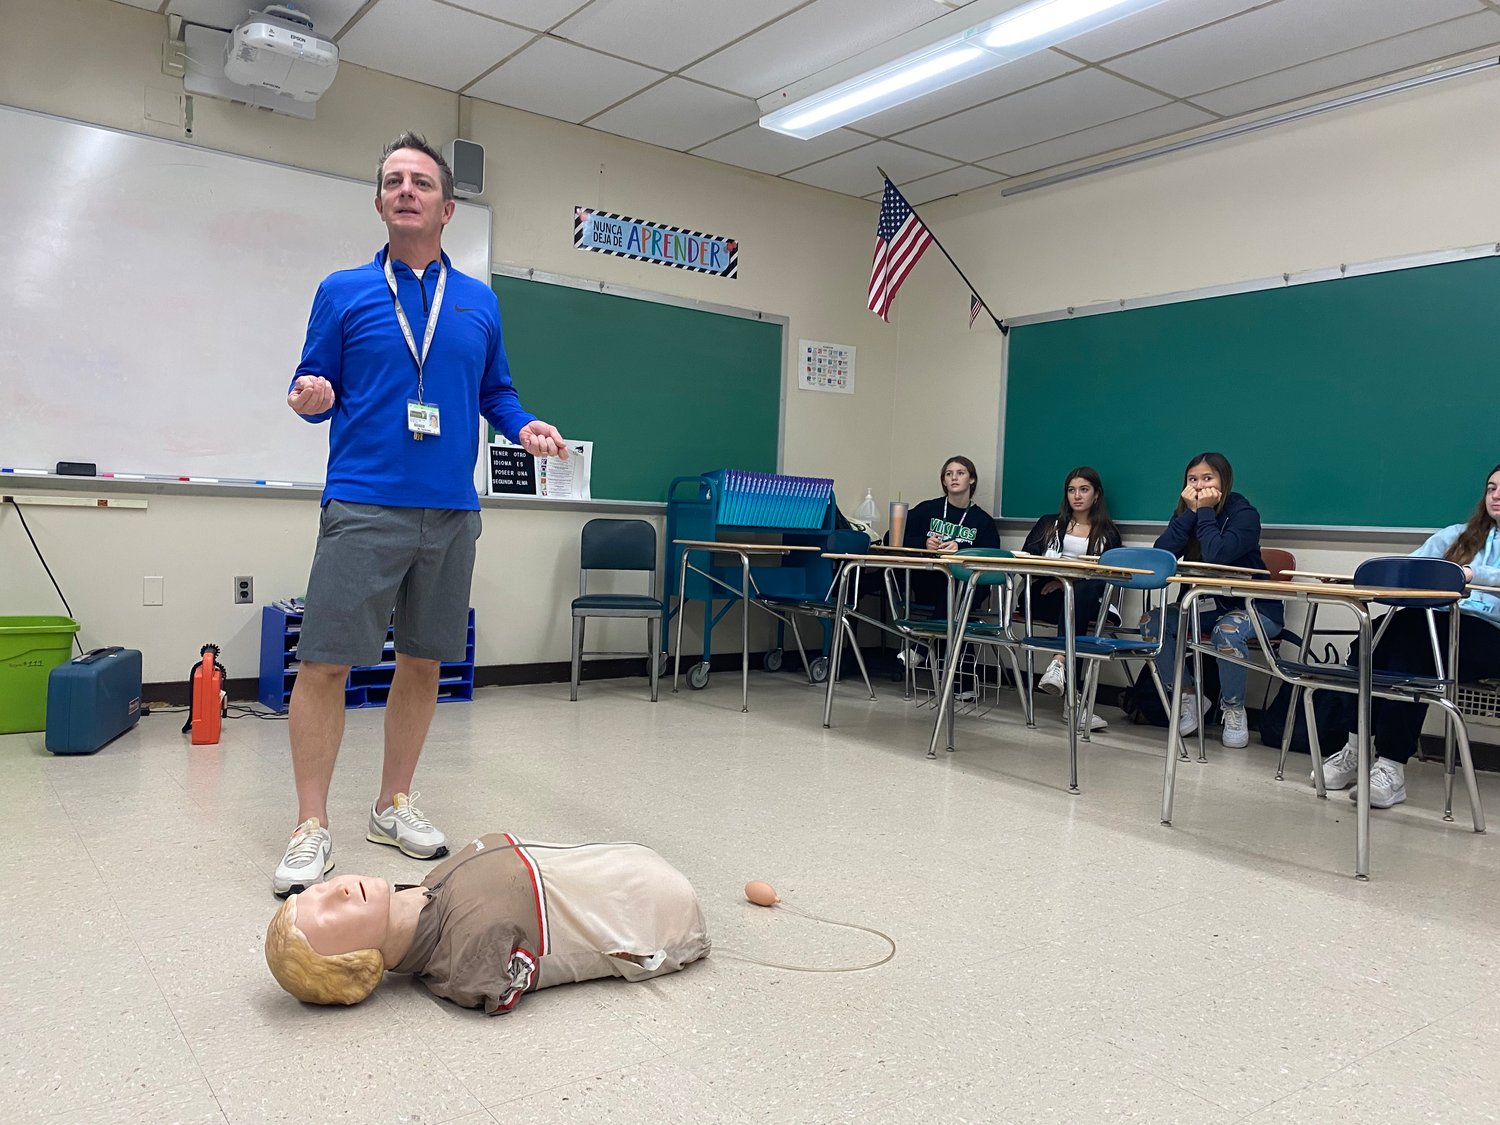 Mike Spreckels, a 20-year veteran of Seaford schools, lectures a class of sophomores, juniors and seniors on how to perform CPR.